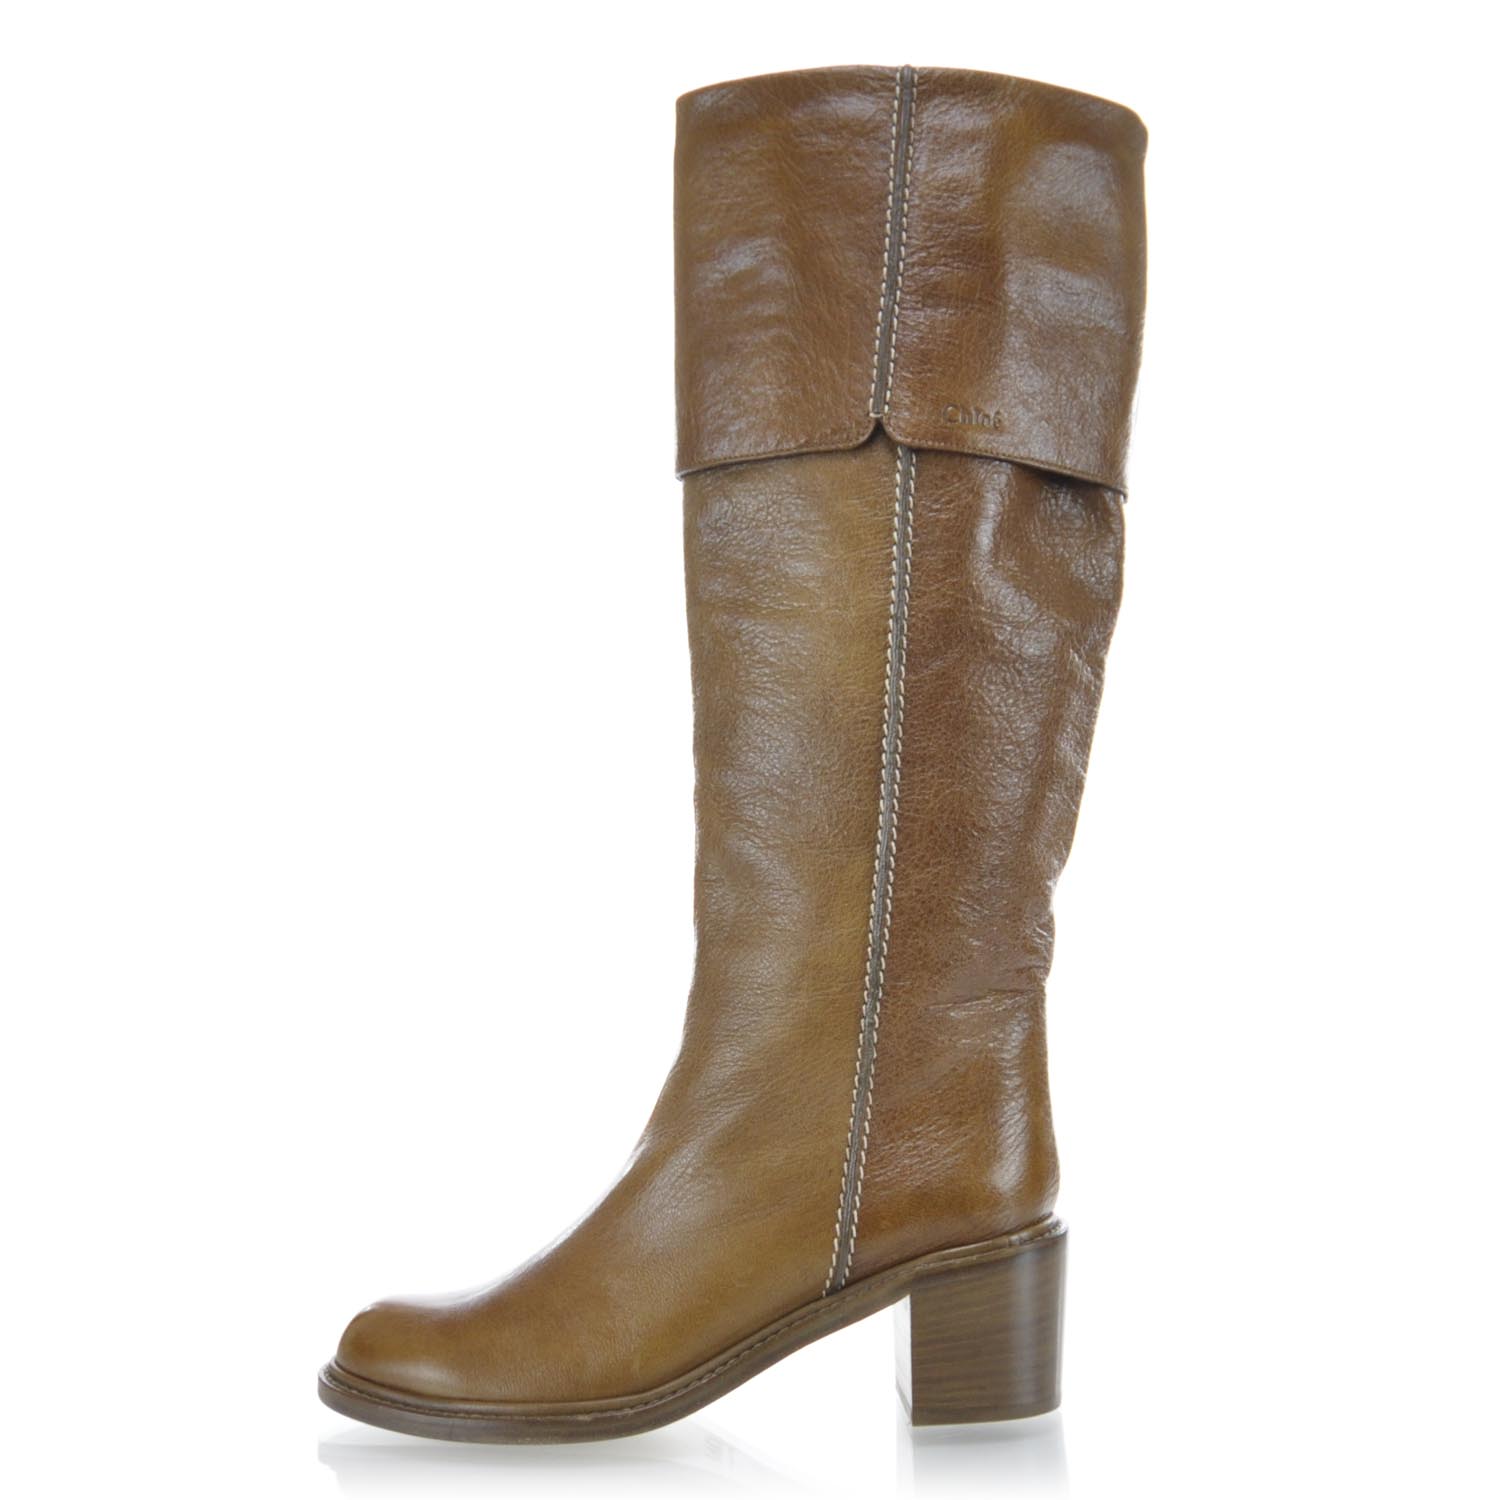 CHLOE Leather Tall Riding Boots 37.5 30126